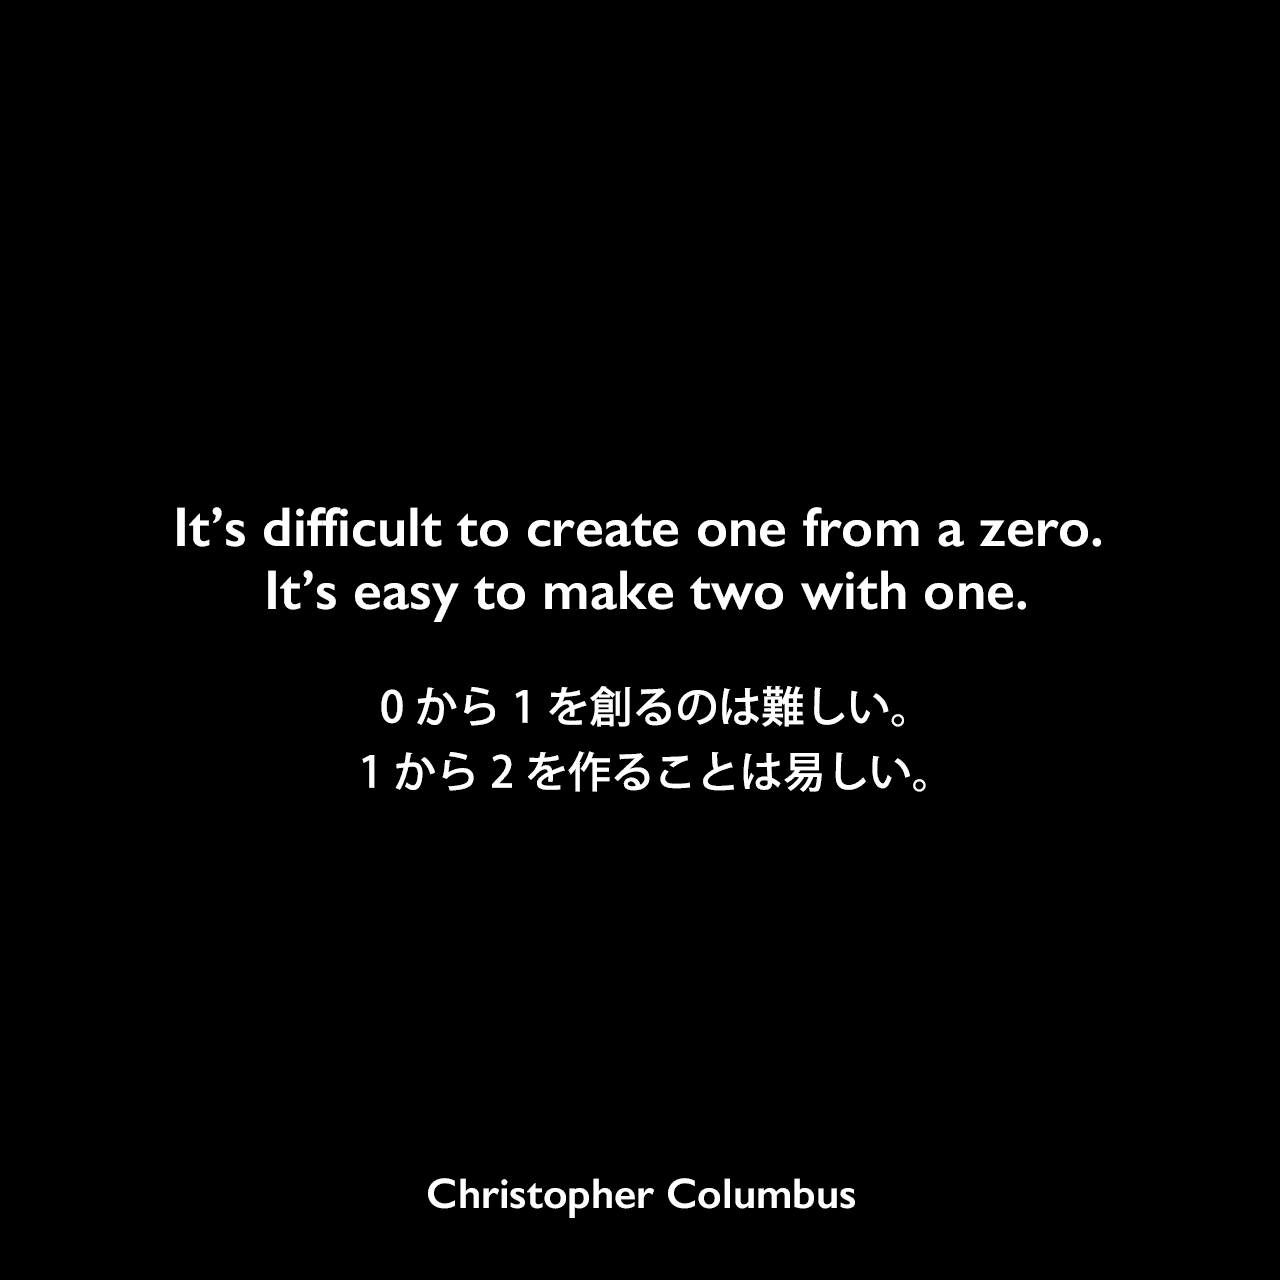 It’s difficult to create one from a zero. It’s easy to make two with one.0から1を創るのは難しい。1から2を作ることは易しい。Christopher Columbus